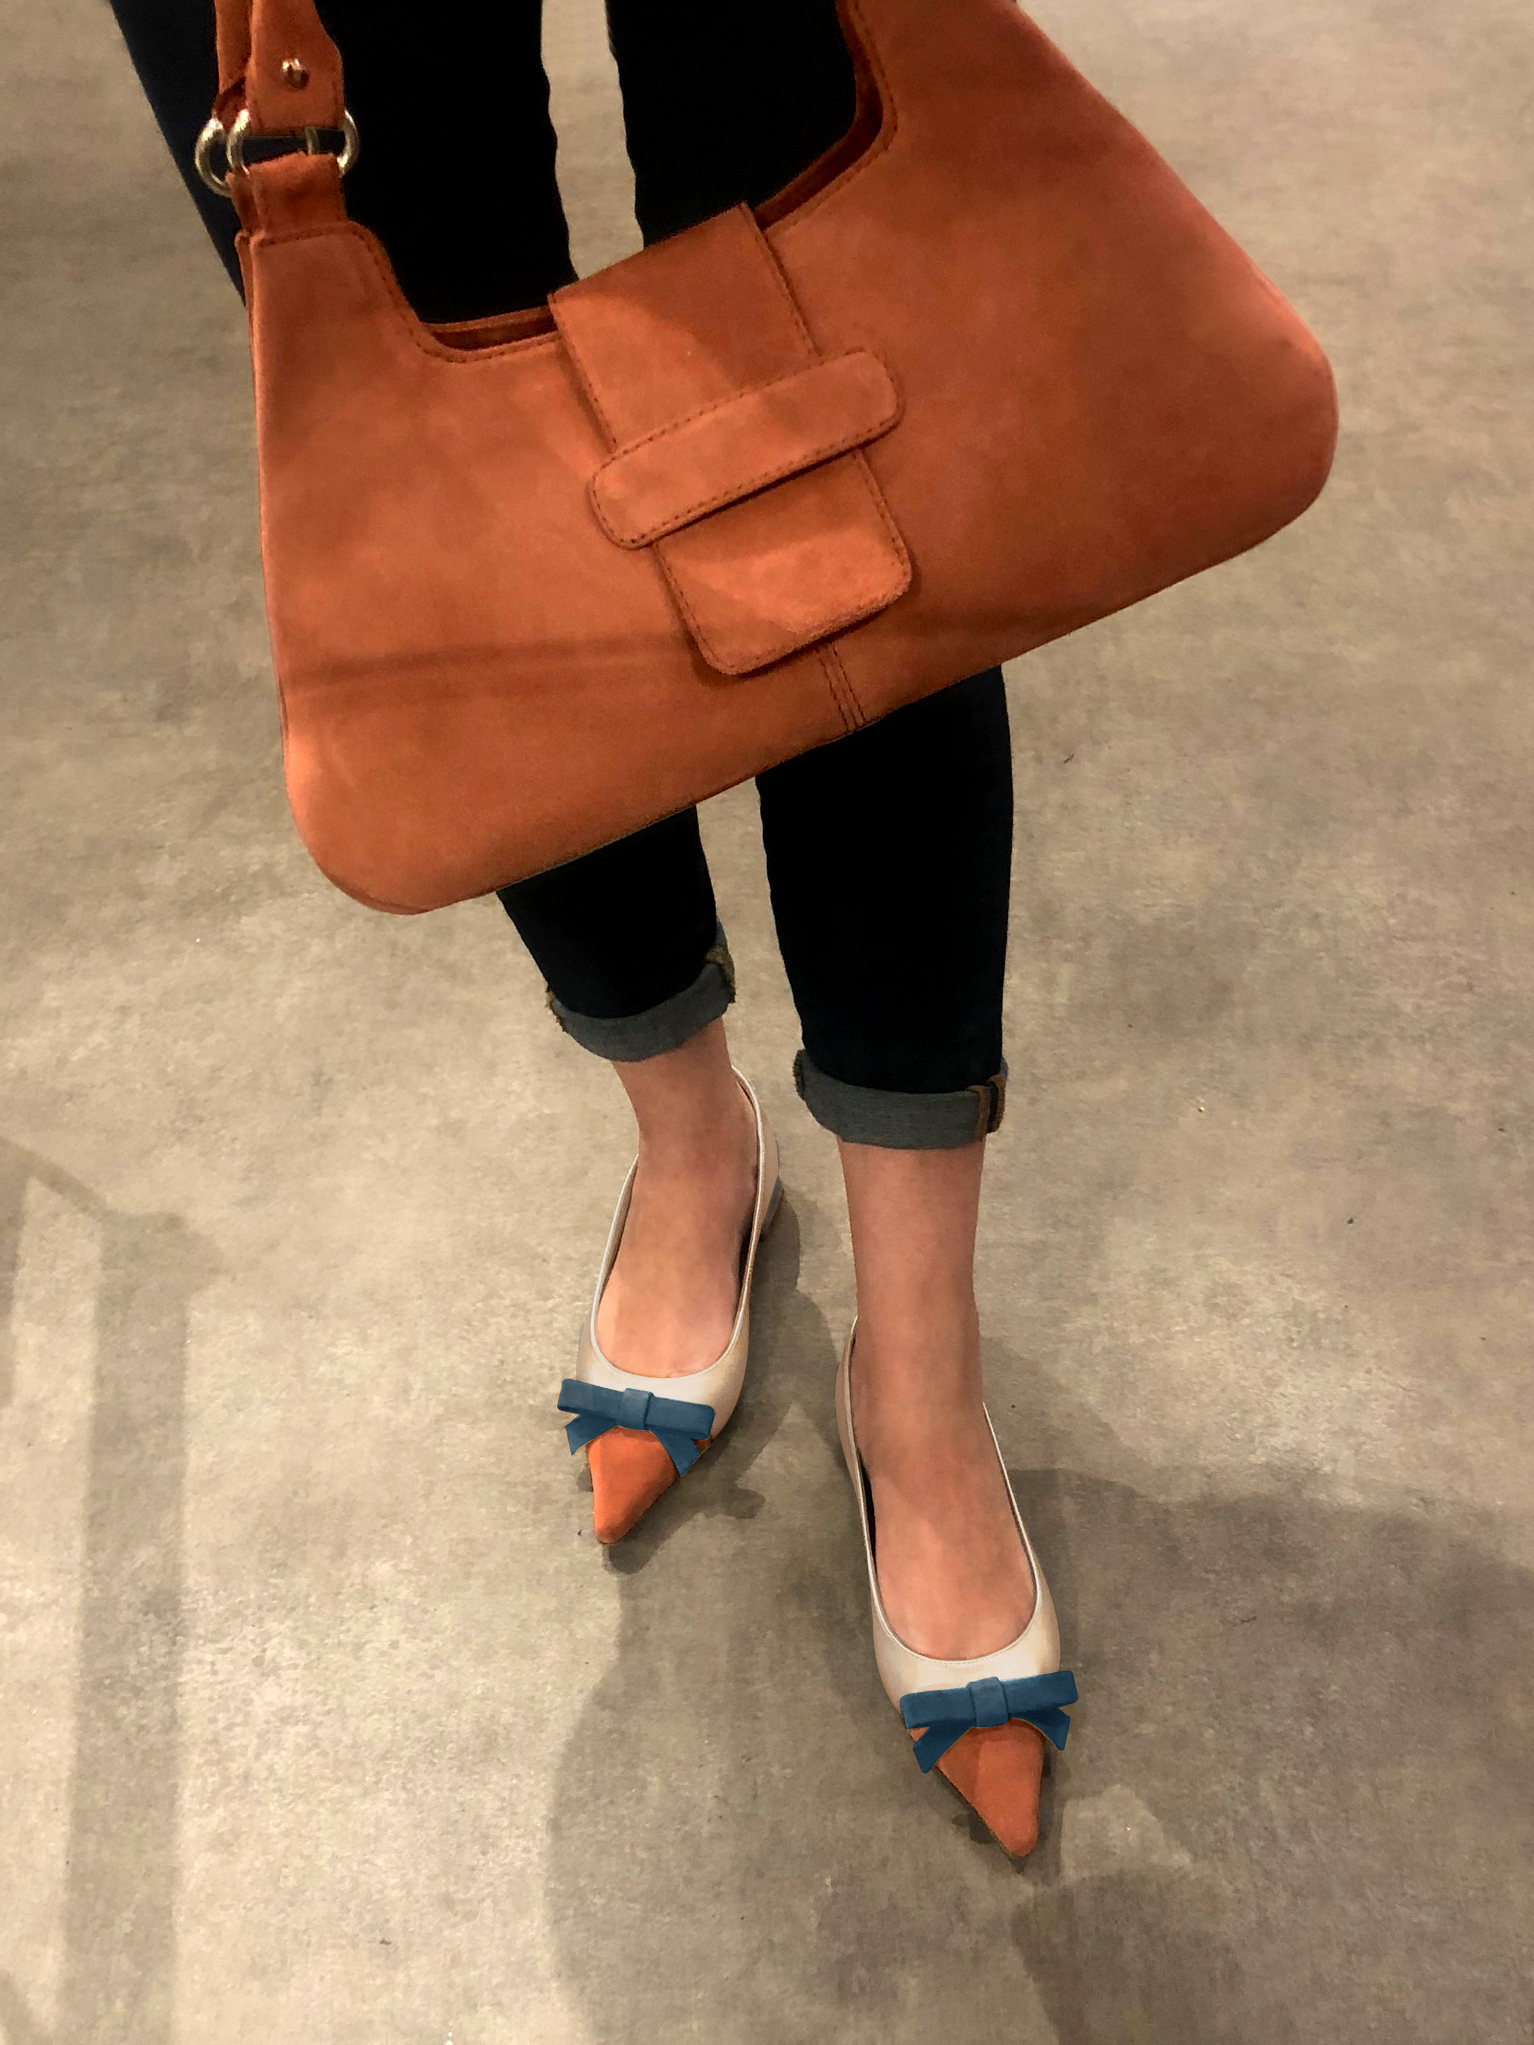 Terracotta orange, gold and peacock blue women's ballet pumps, with low heels. Pointed toe. Flat flare heels. Worn view - Florence KOOIJMAN